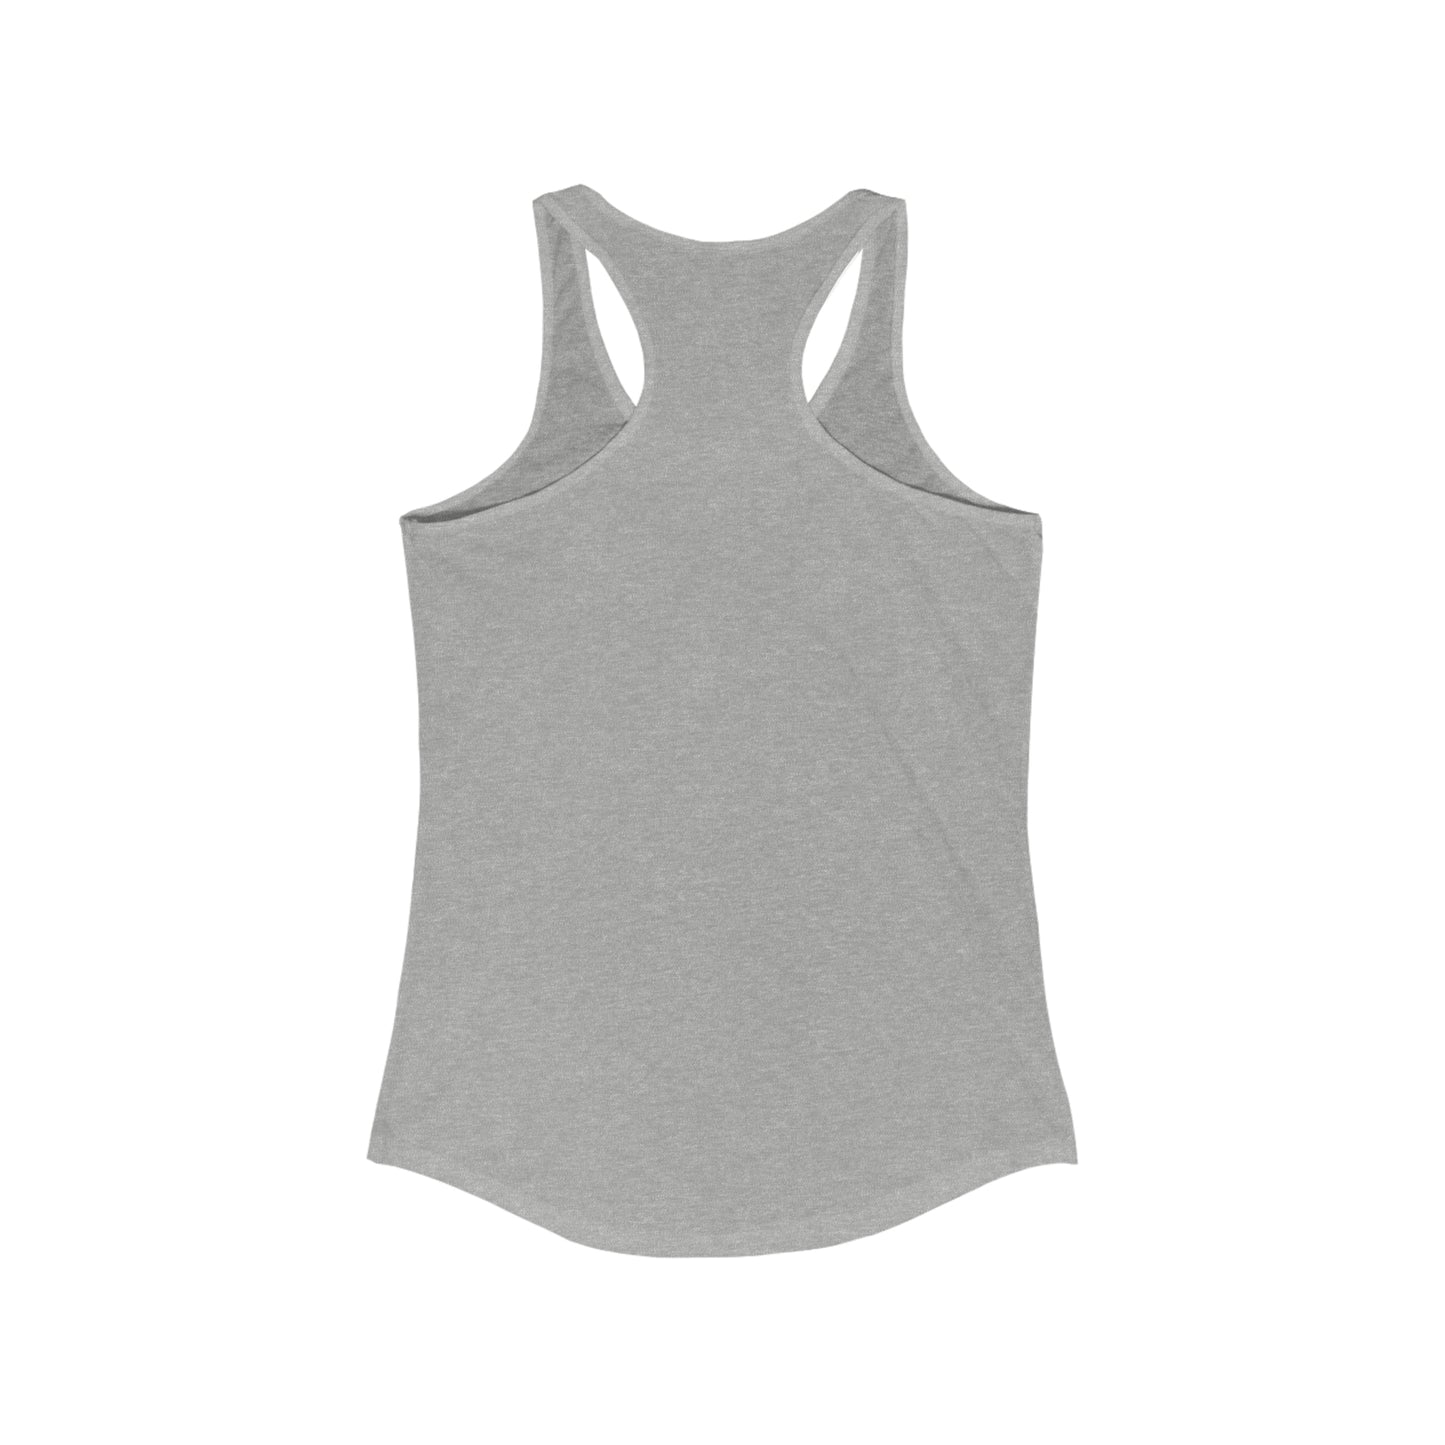 Busy being Godly slim fit tank-top